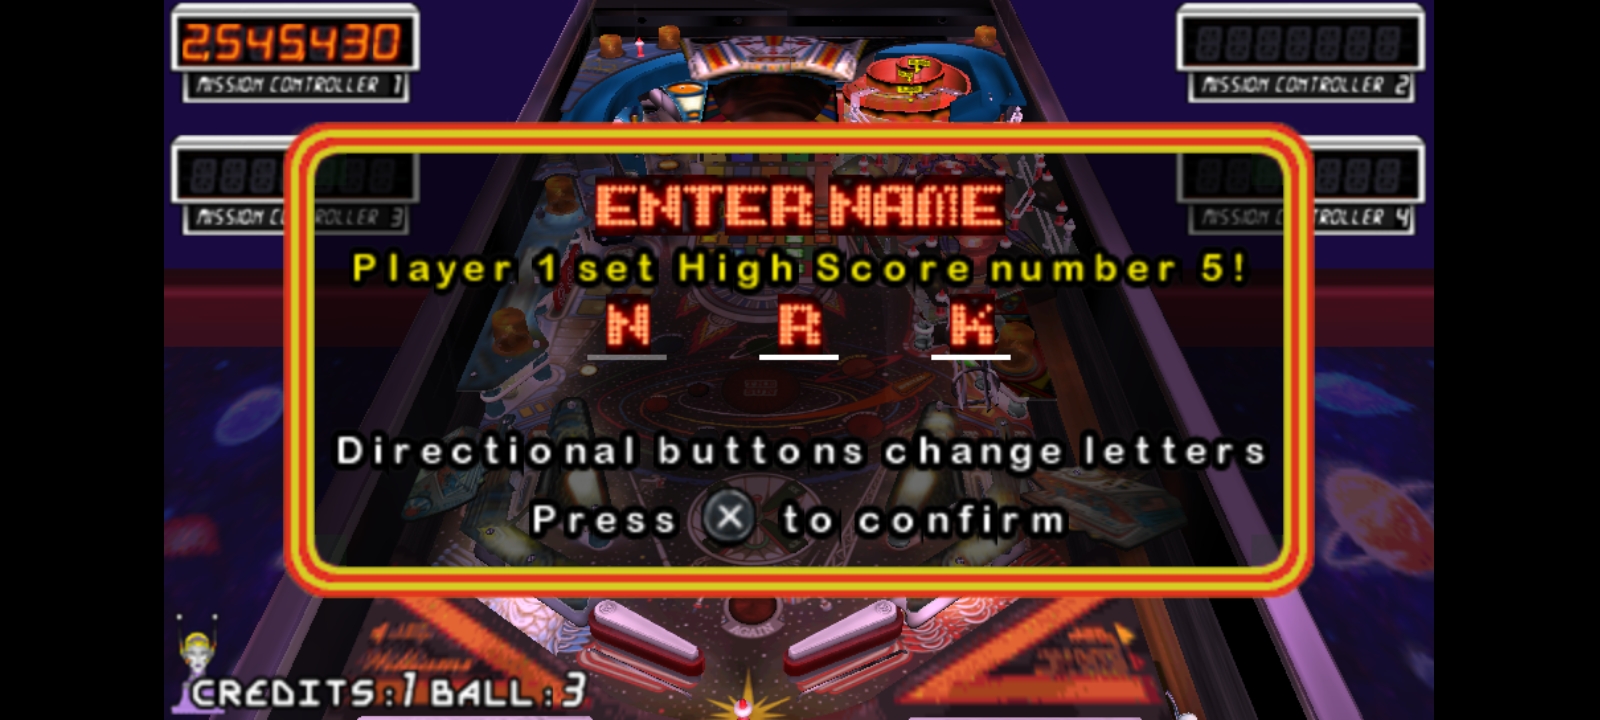 Hauntedprogram: Pinball Hall Of Fame: The Williams Collection: Pin*Bot (PSP Emulated) 2,545,430 points on 2022-07-21 22:58:14